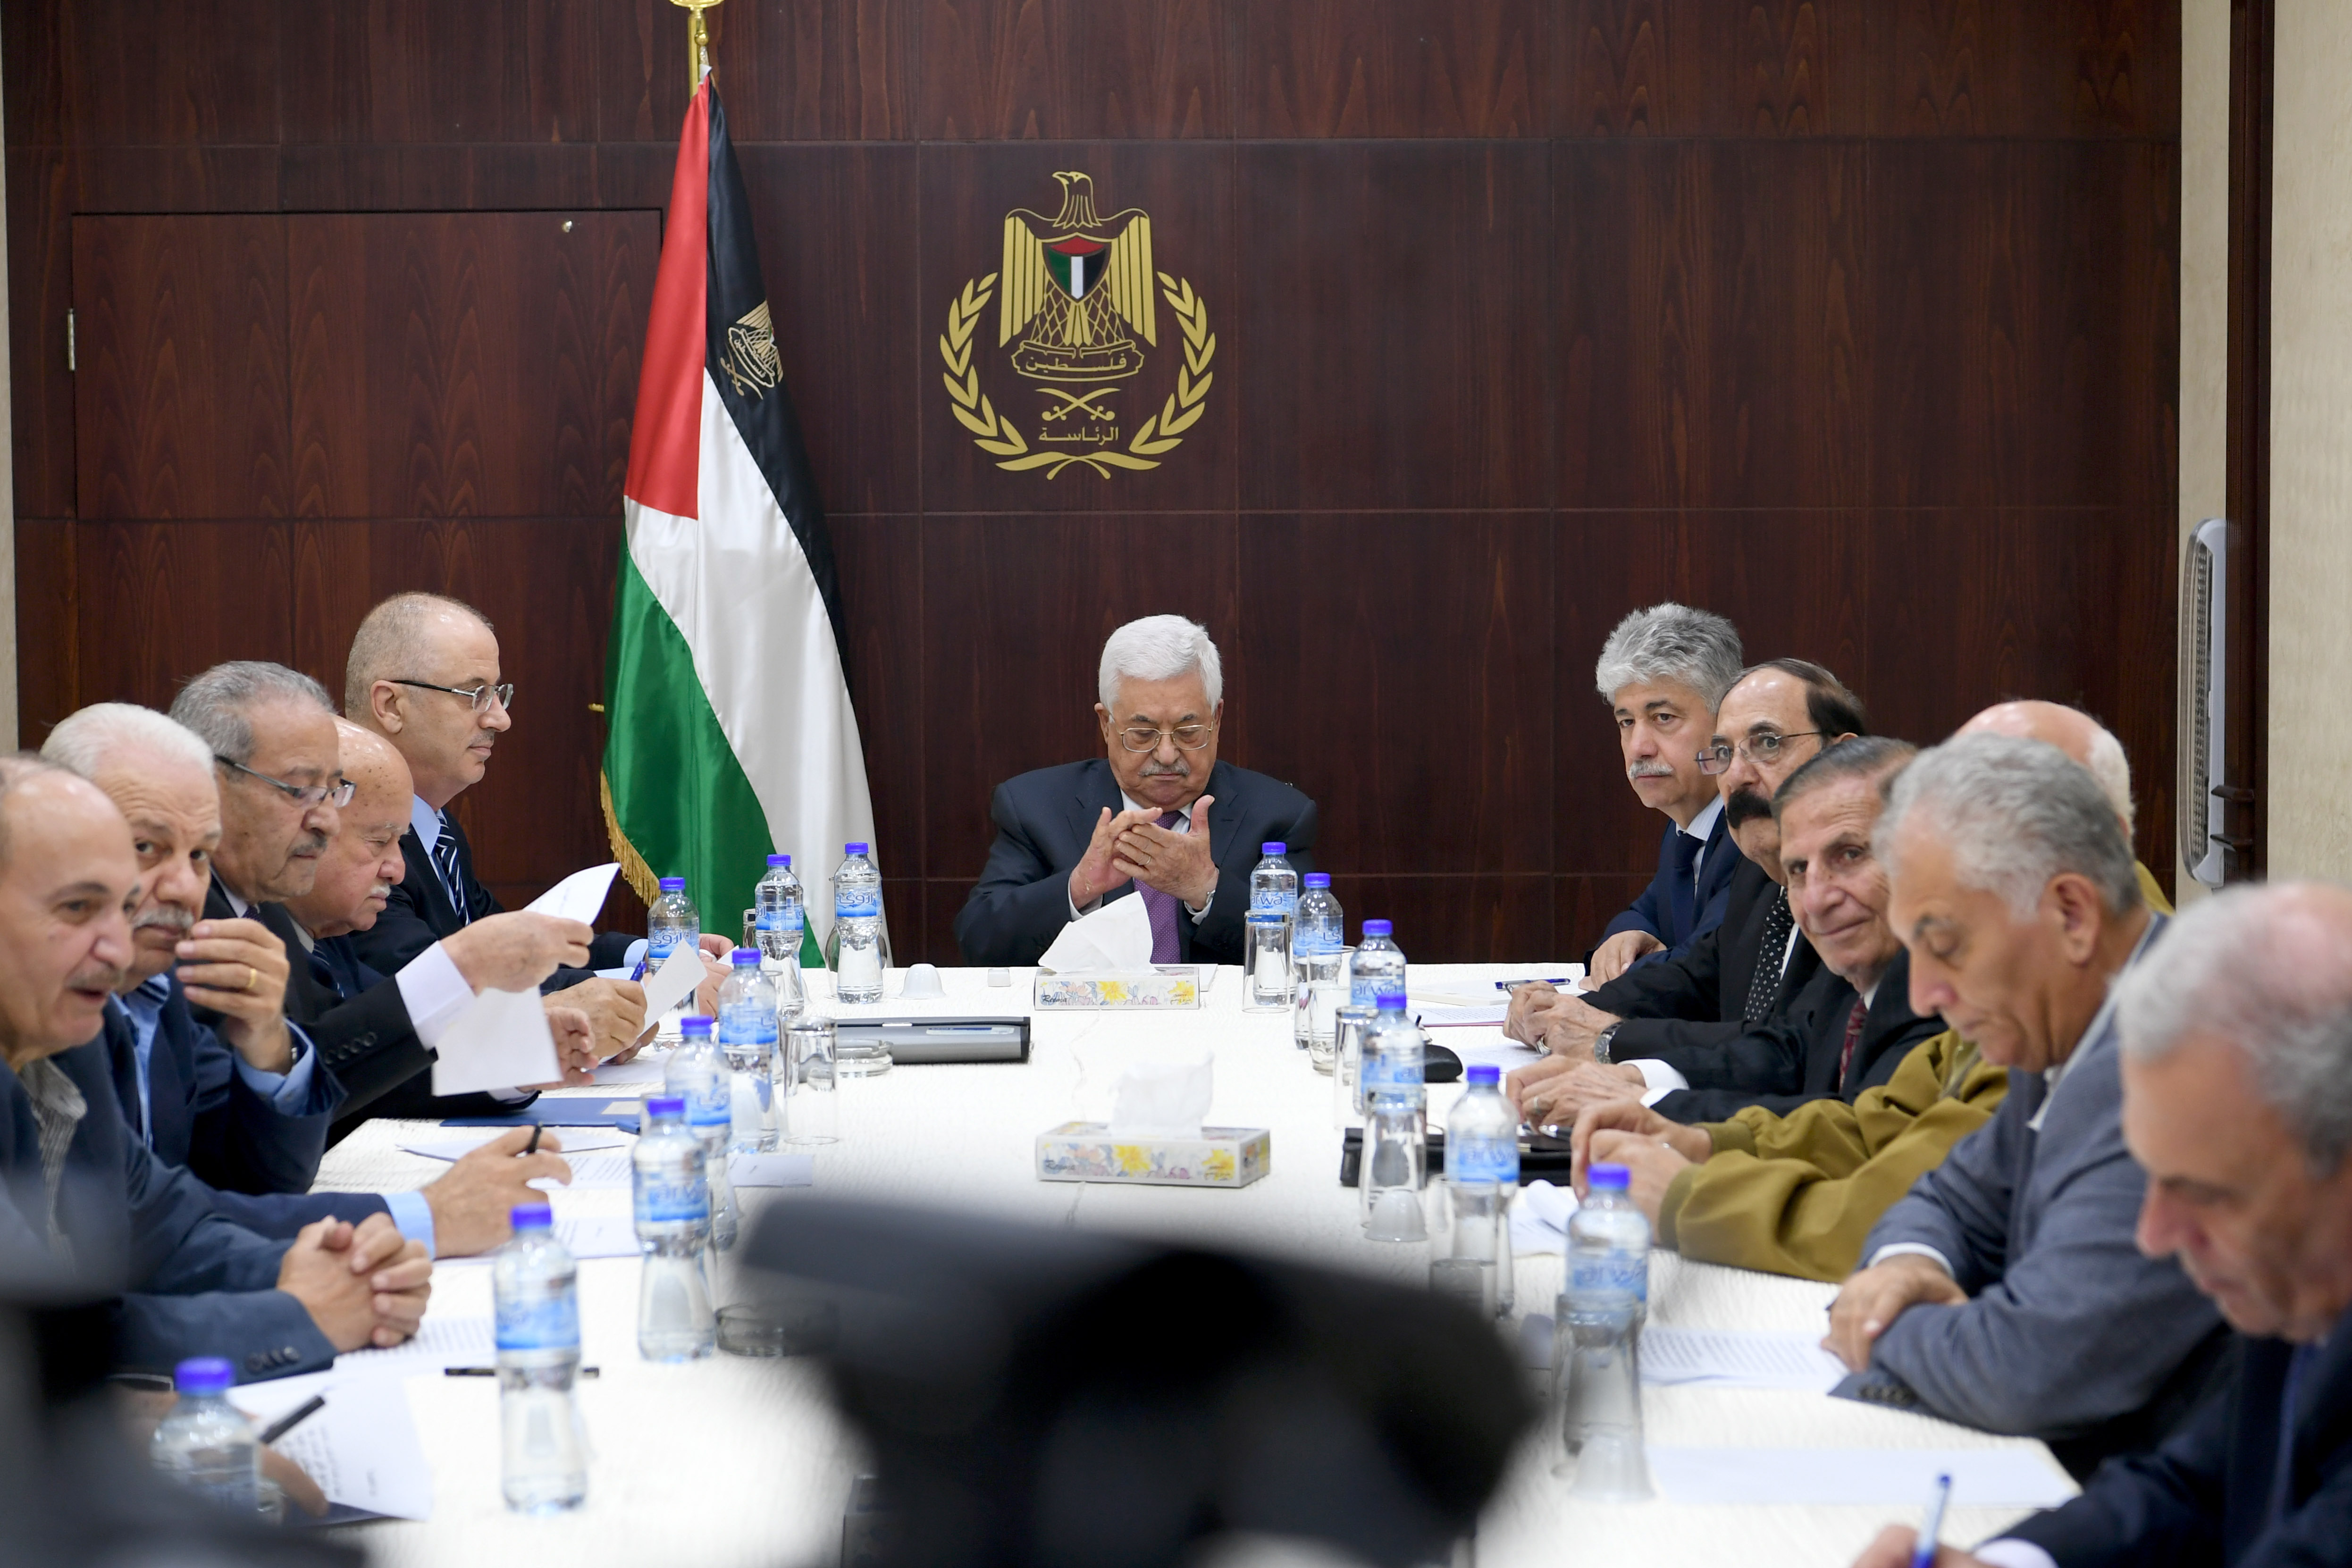 The Palestinian Liberation Organization's (PLO) Executive Committee meeting chaired by President Mahmoud Abbas